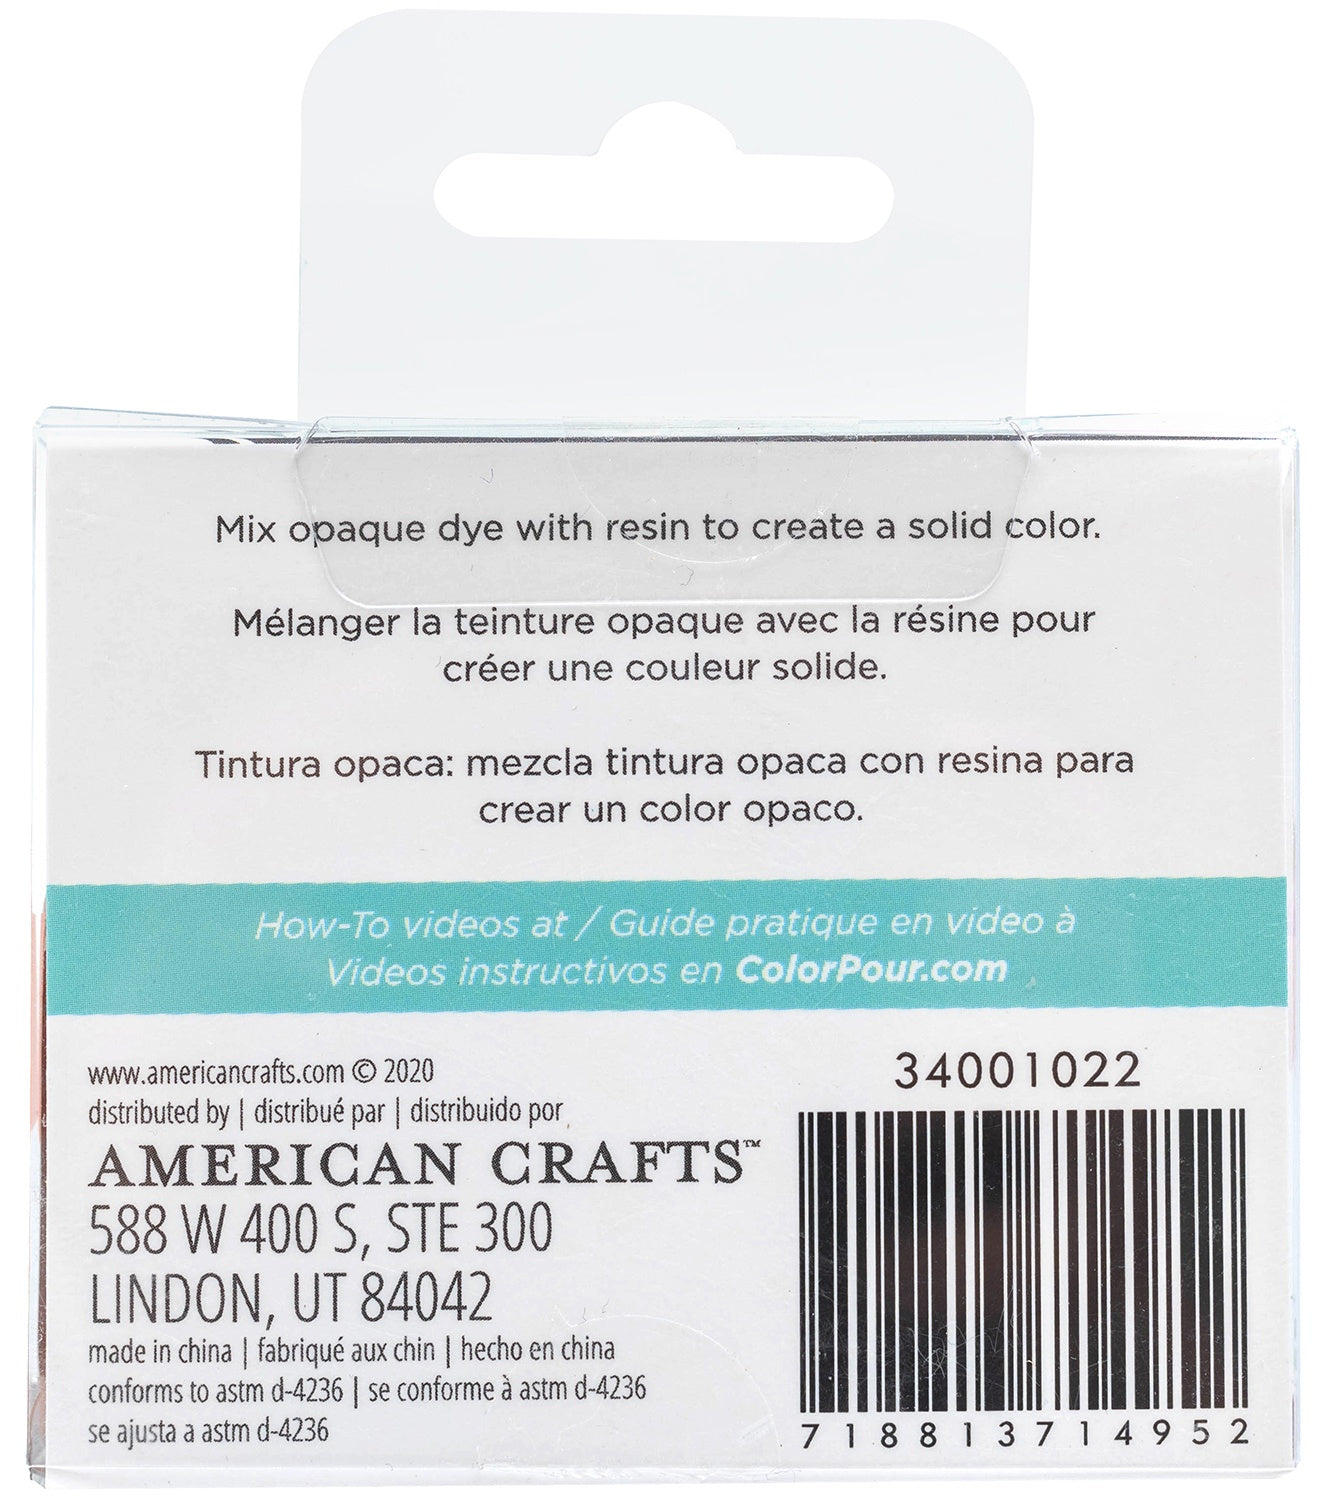 American Crafts Color Pour Resin Opaque Dye -Natural